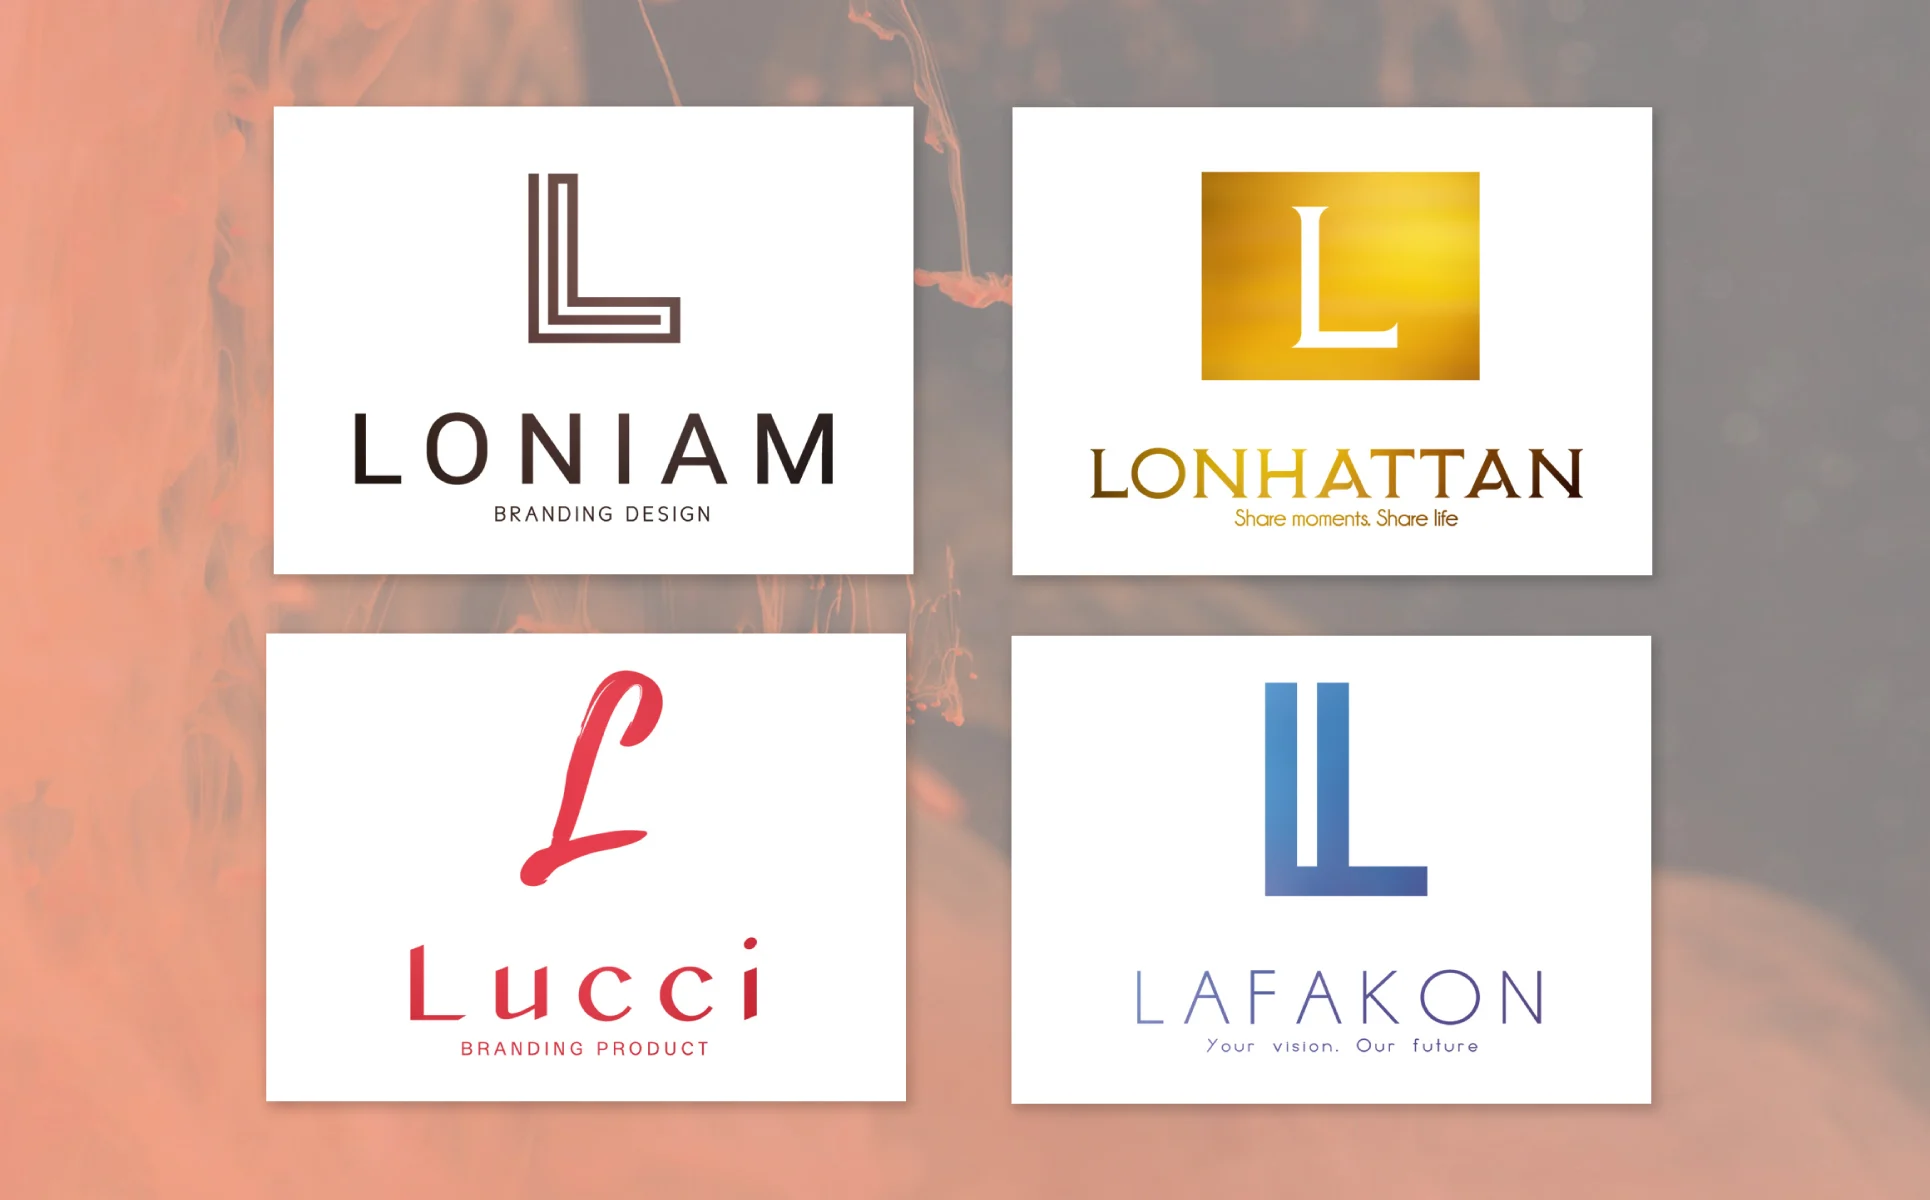 Nice logos designs in different colors.